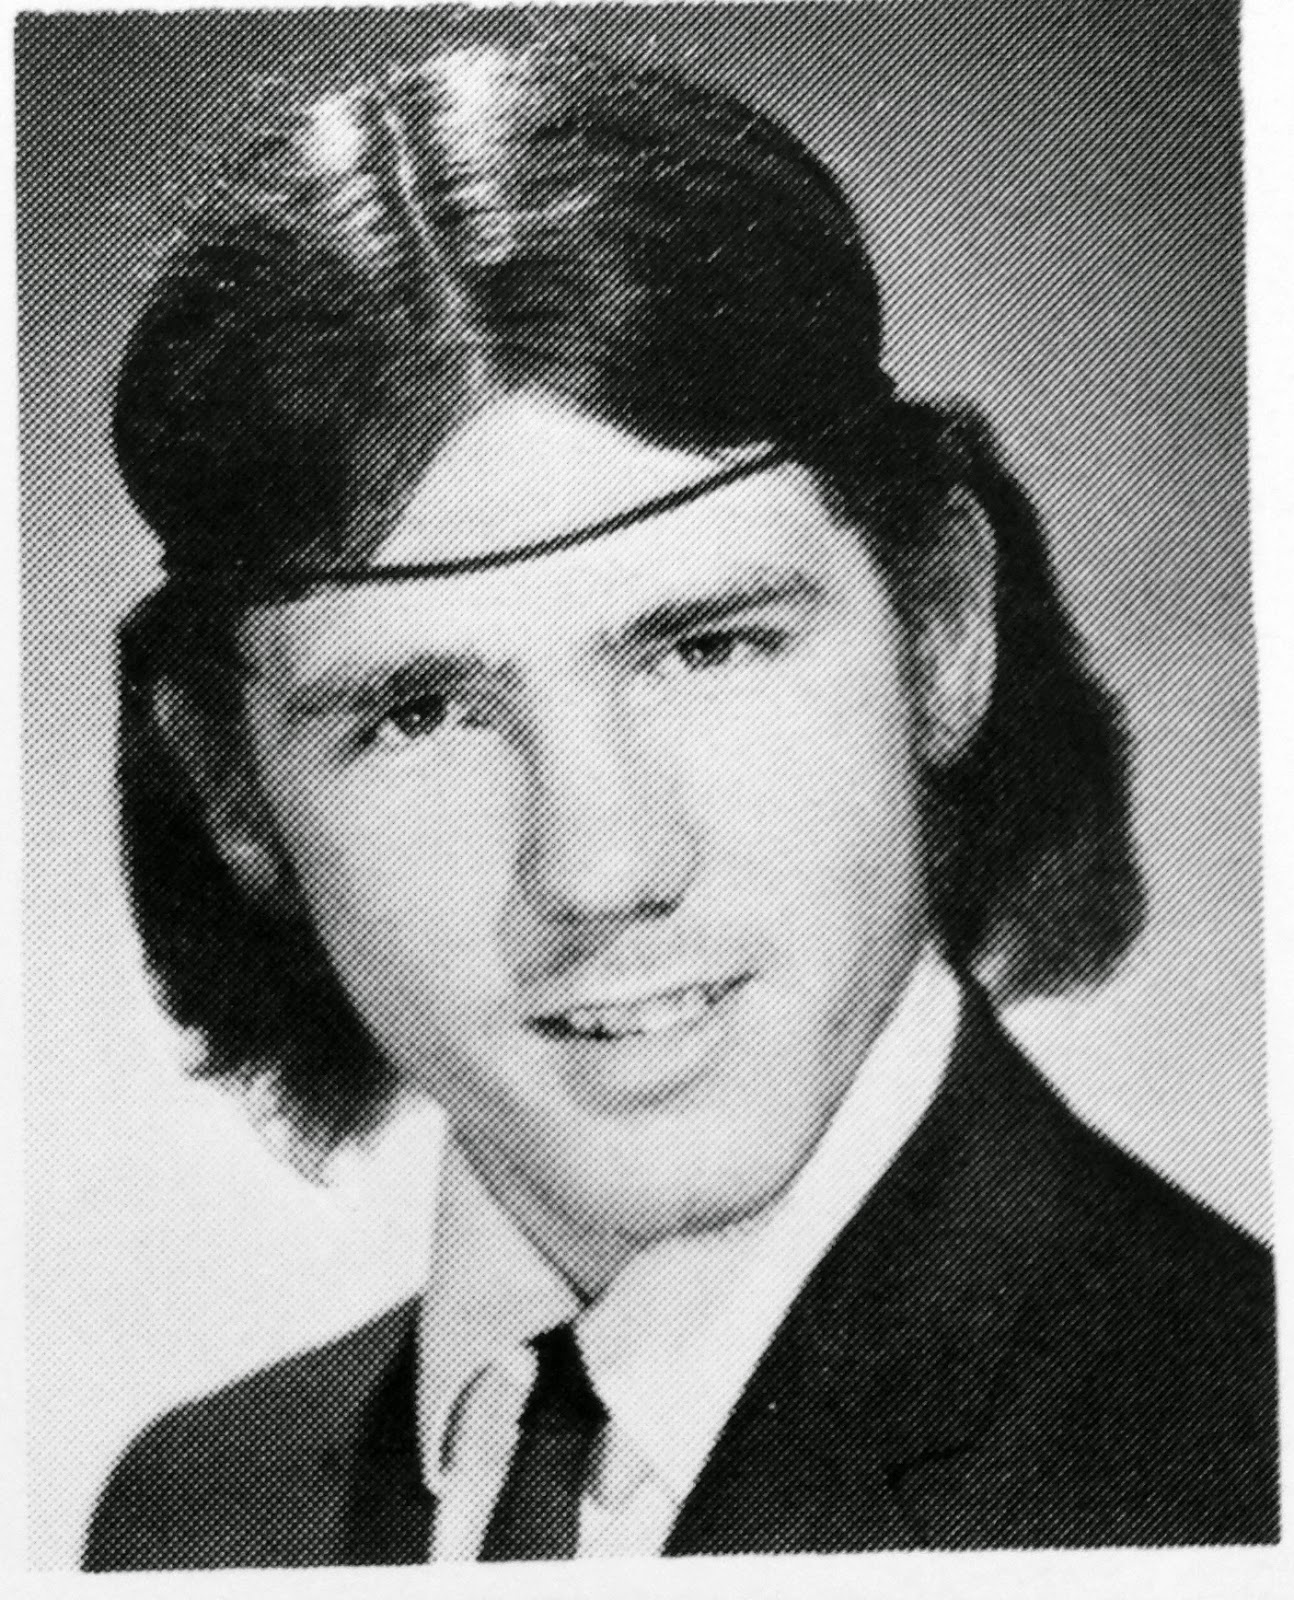 MY FAVORITE 26 SEATTLE HIGH SCHOOL YEARBOOK HAIRSTYLES FROM 1971 ...